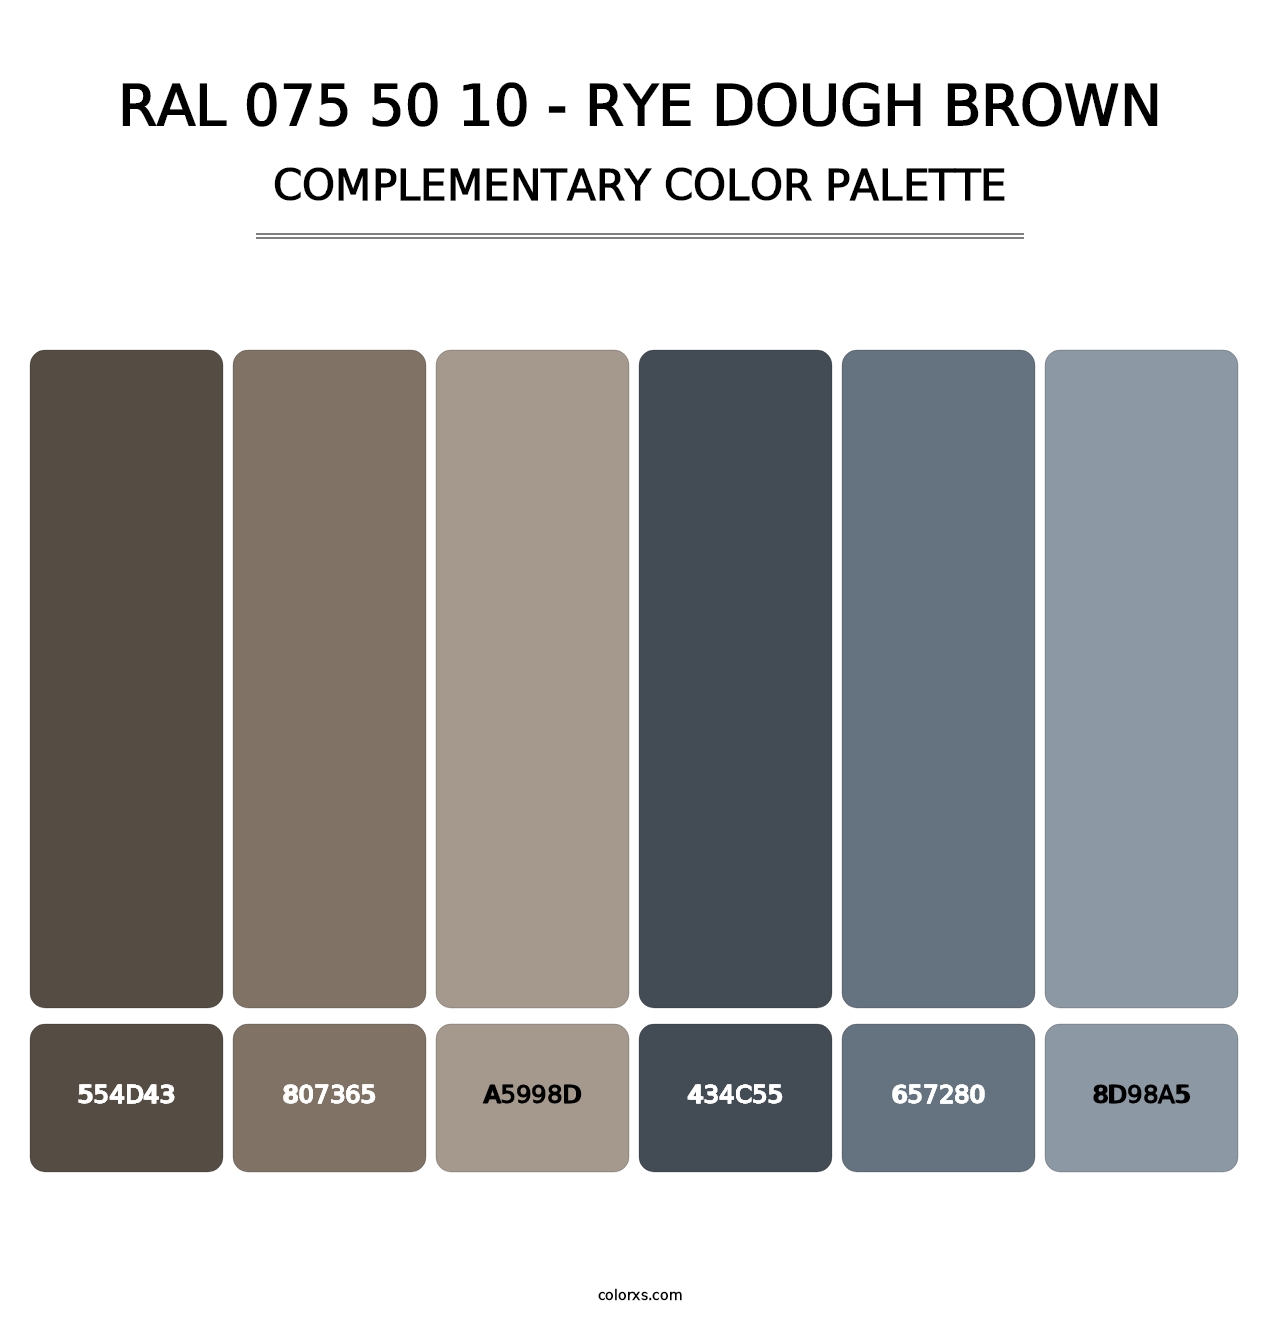 RAL 075 50 10 - Rye Dough Brown - Complementary Color Palette